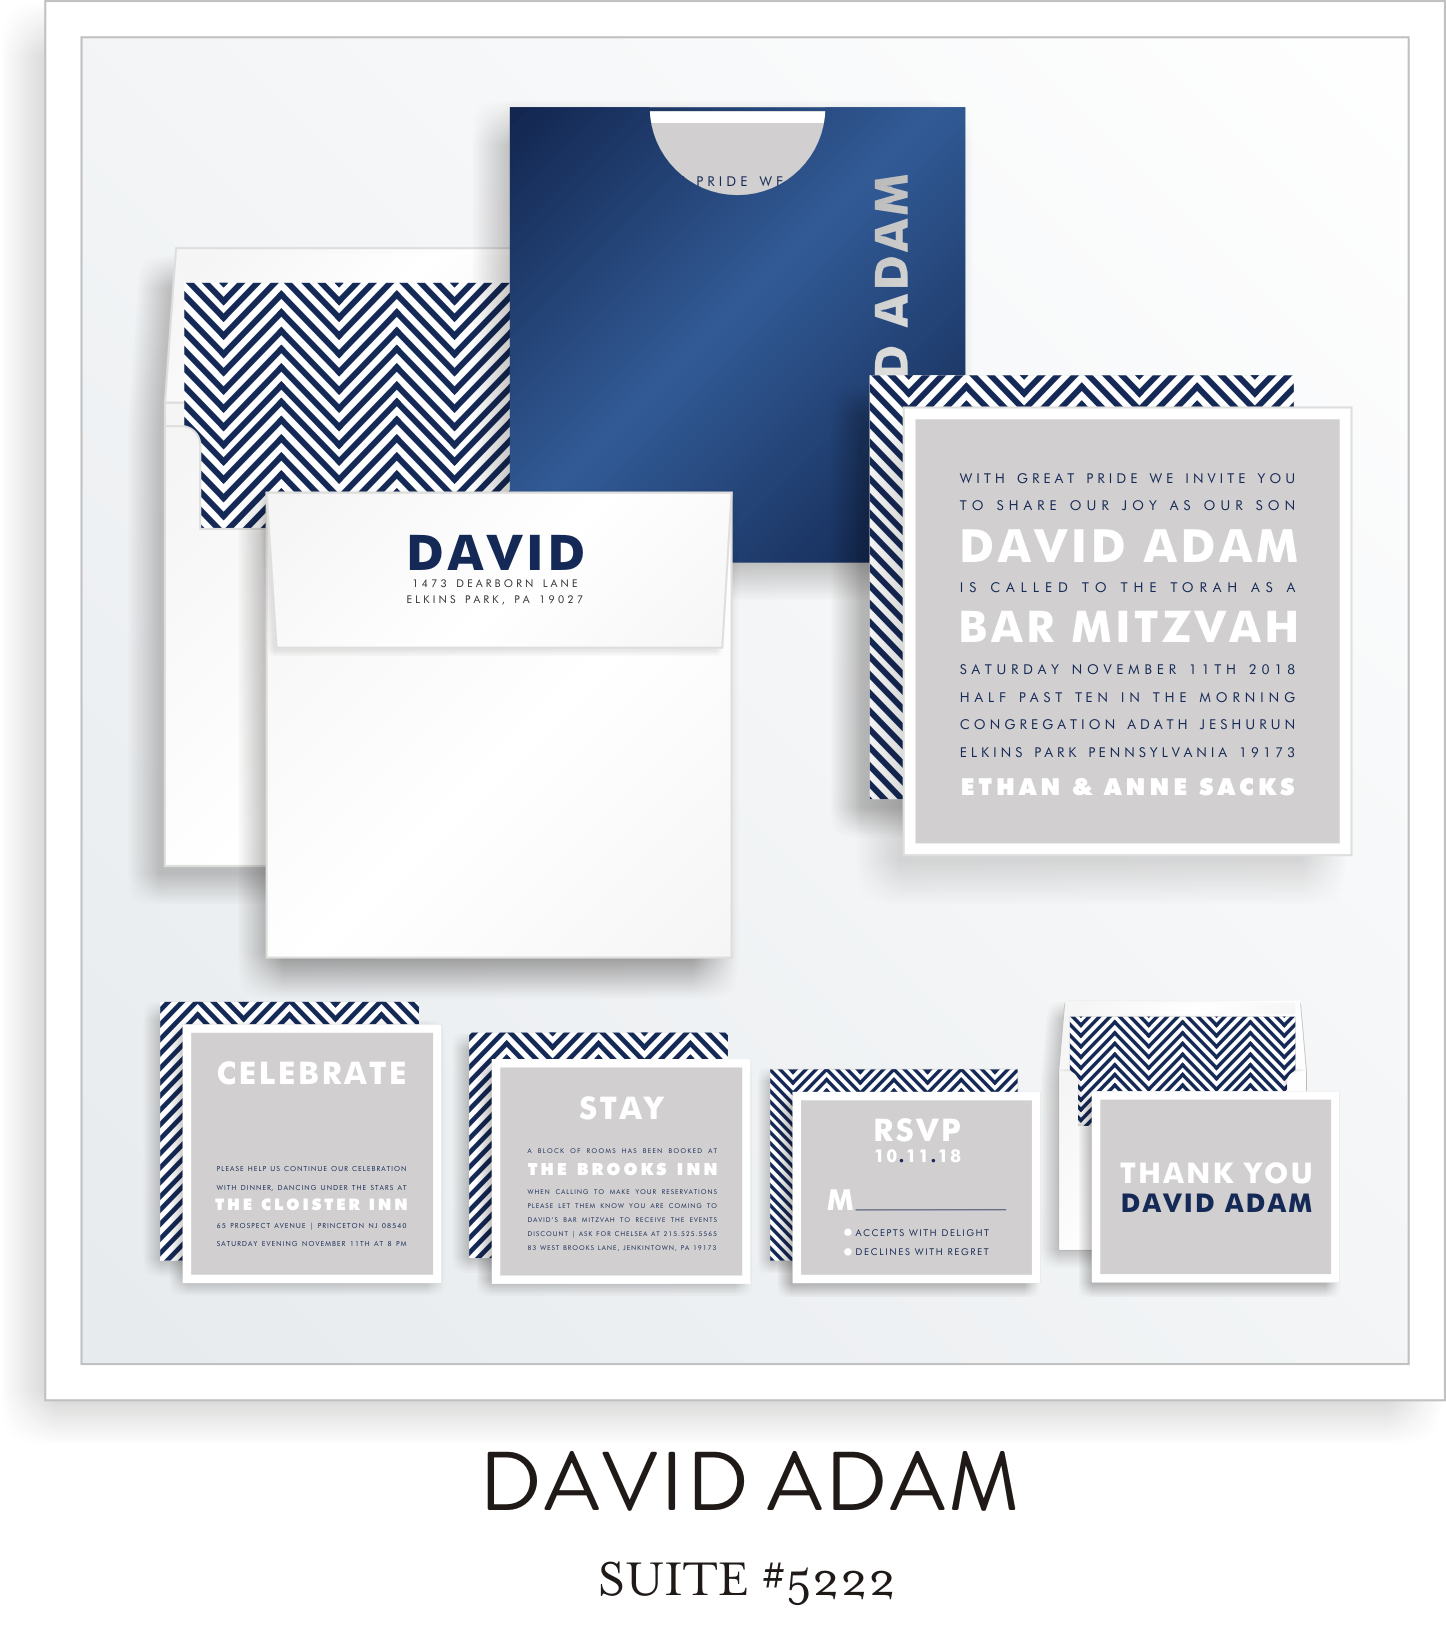 Copy of Copy of  <a href=/bar-mitzvah-invitations-5222>Suite Details→</a><strong><a href=/david-adam-in-colors>see more colors→</a></strong>